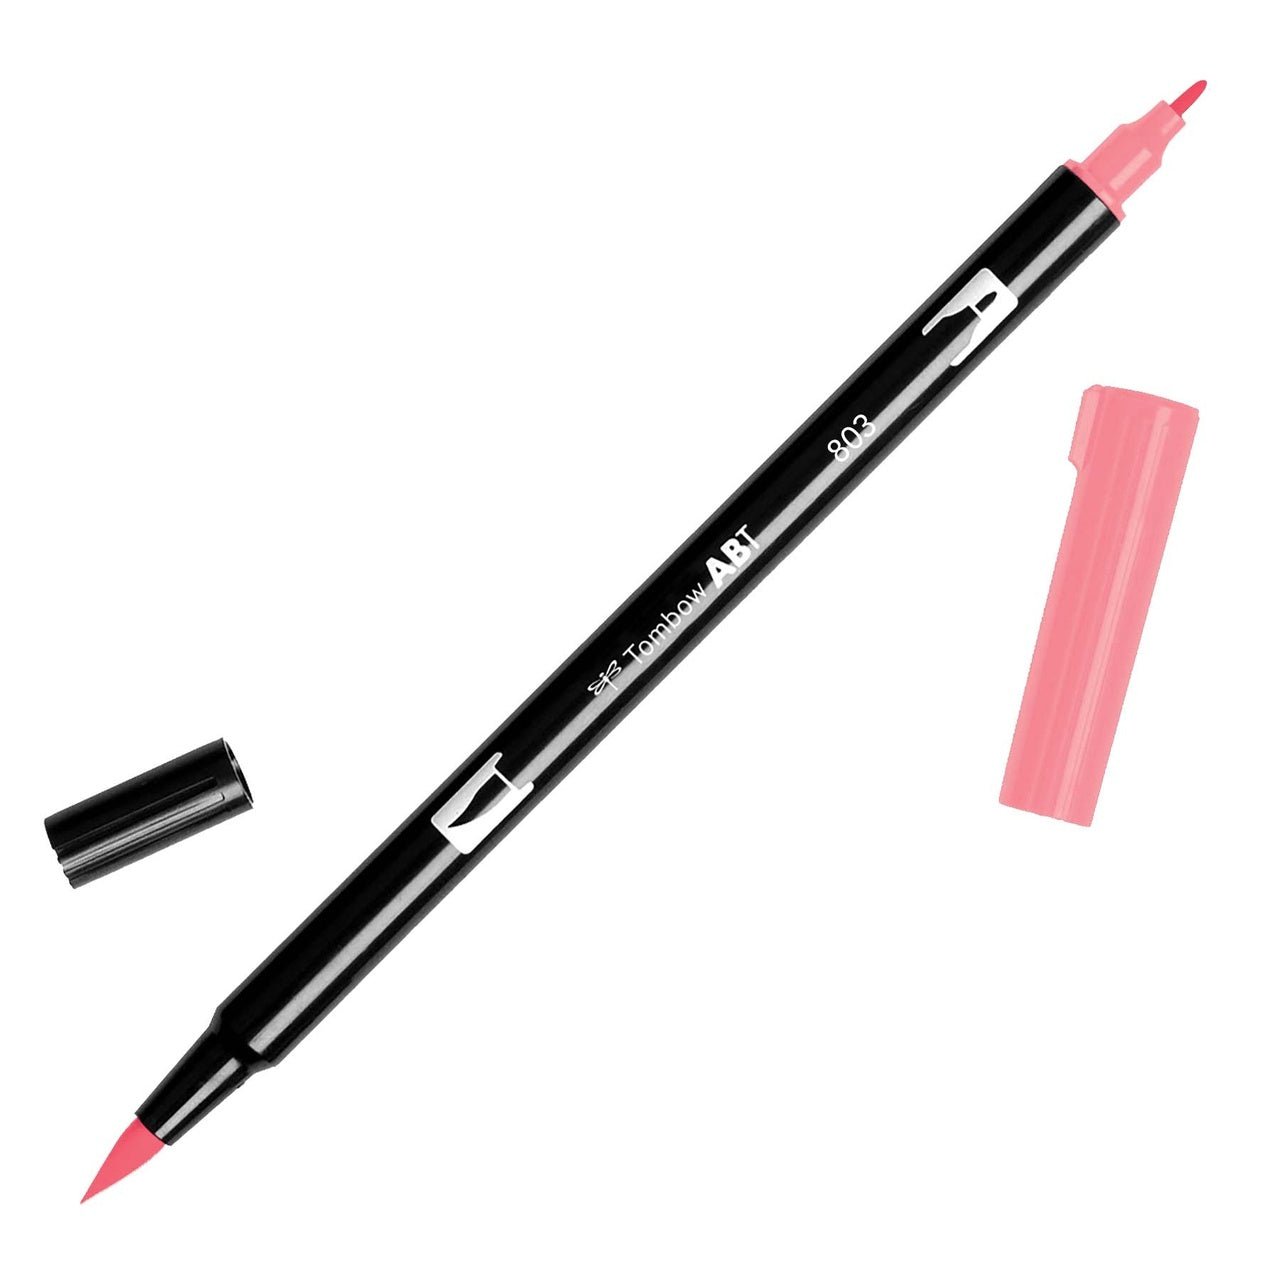 Tombow Dual Brush Pen 803 Pink Punch - merriartist.com